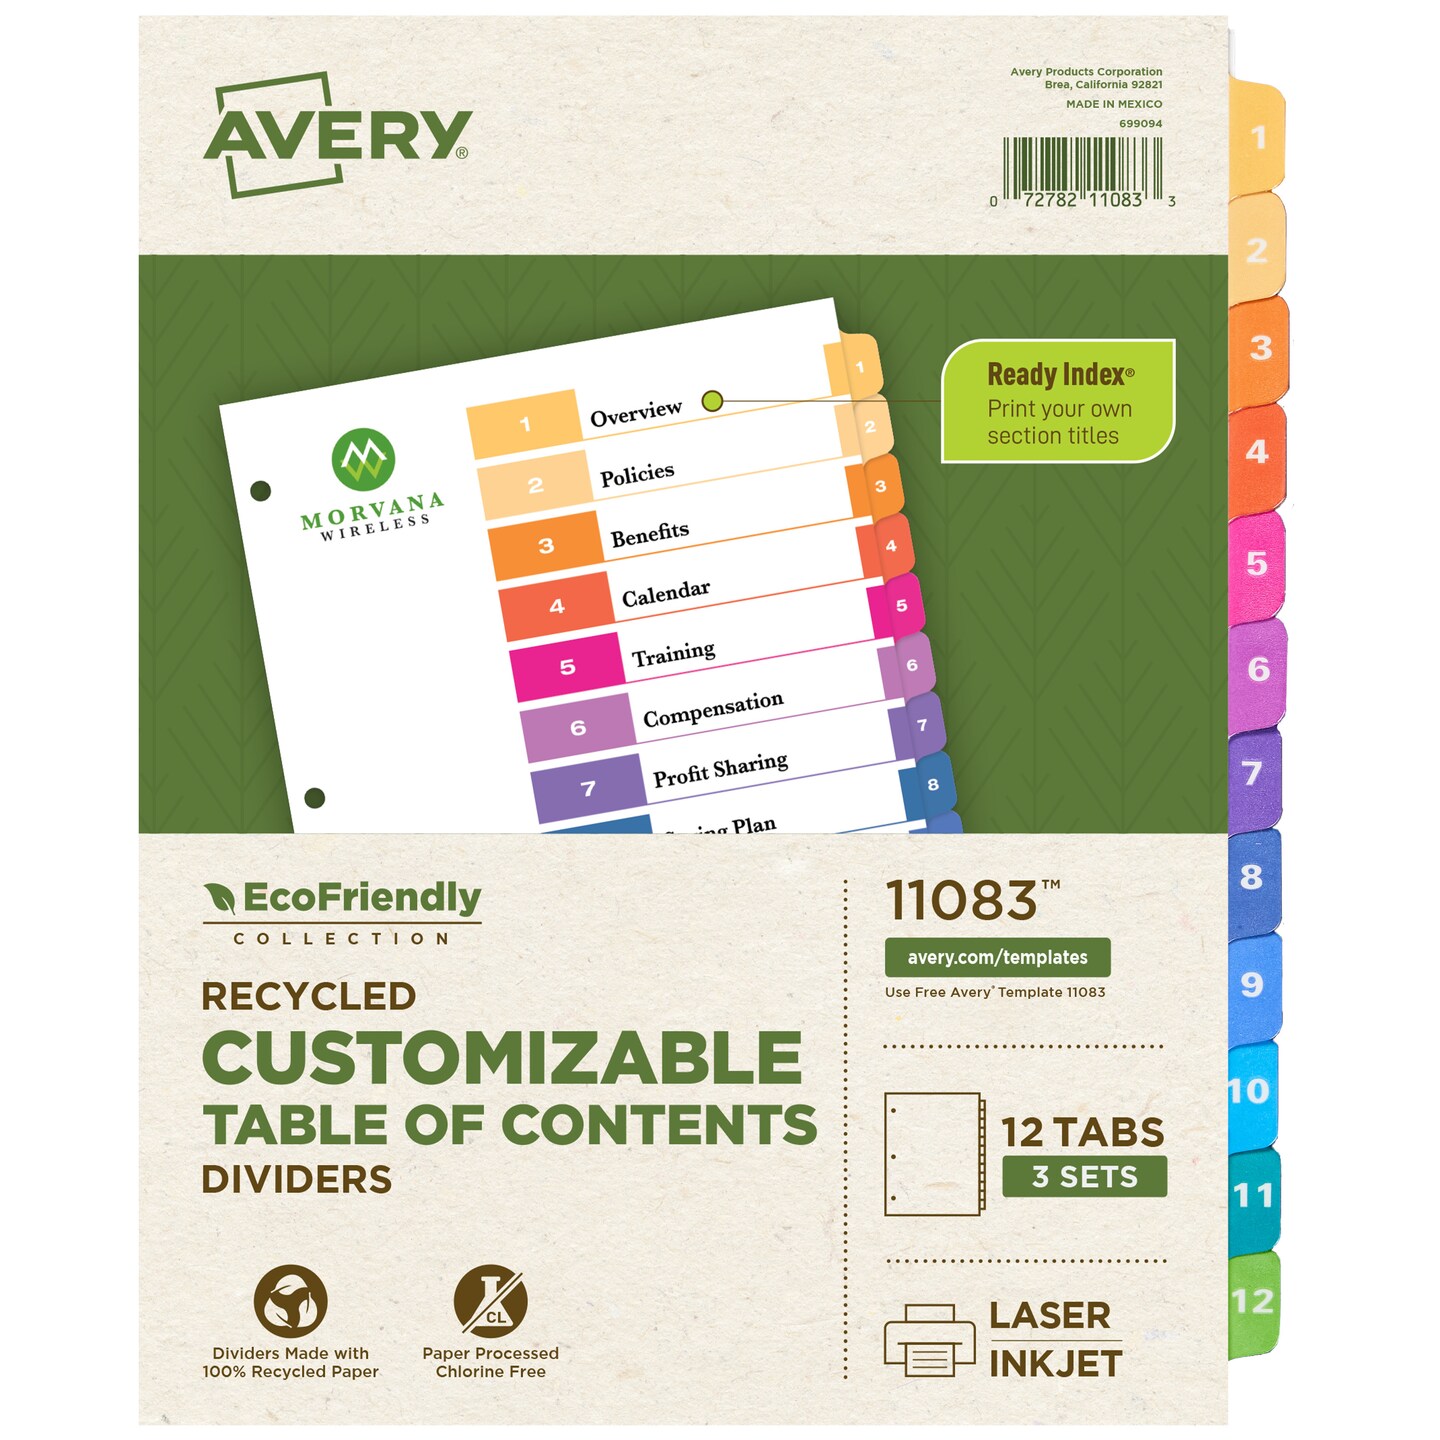 Avery EcoFriendly Recycled Dividers for 3 Ring Binders, 12-Tab, Multicolor Tabs, Ready Index Customizable Table of Contents, 3 Sets for 36 Binder Dividers Total (11083)